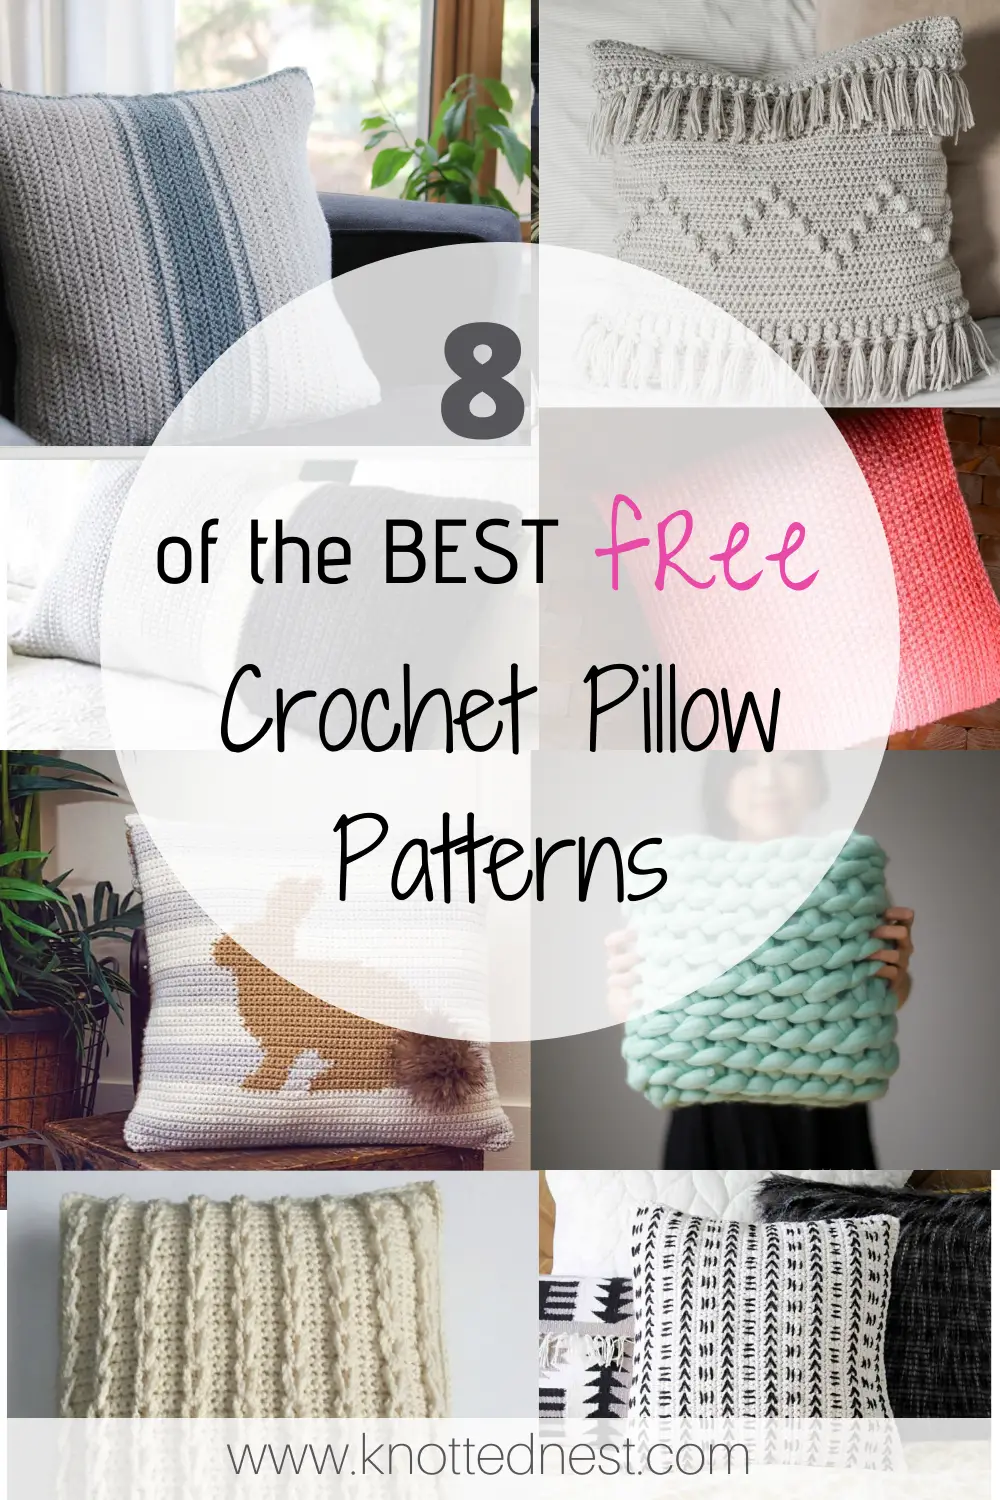 Crochet Pillow Patterns | Spring Round Up | - The Knotted Nest